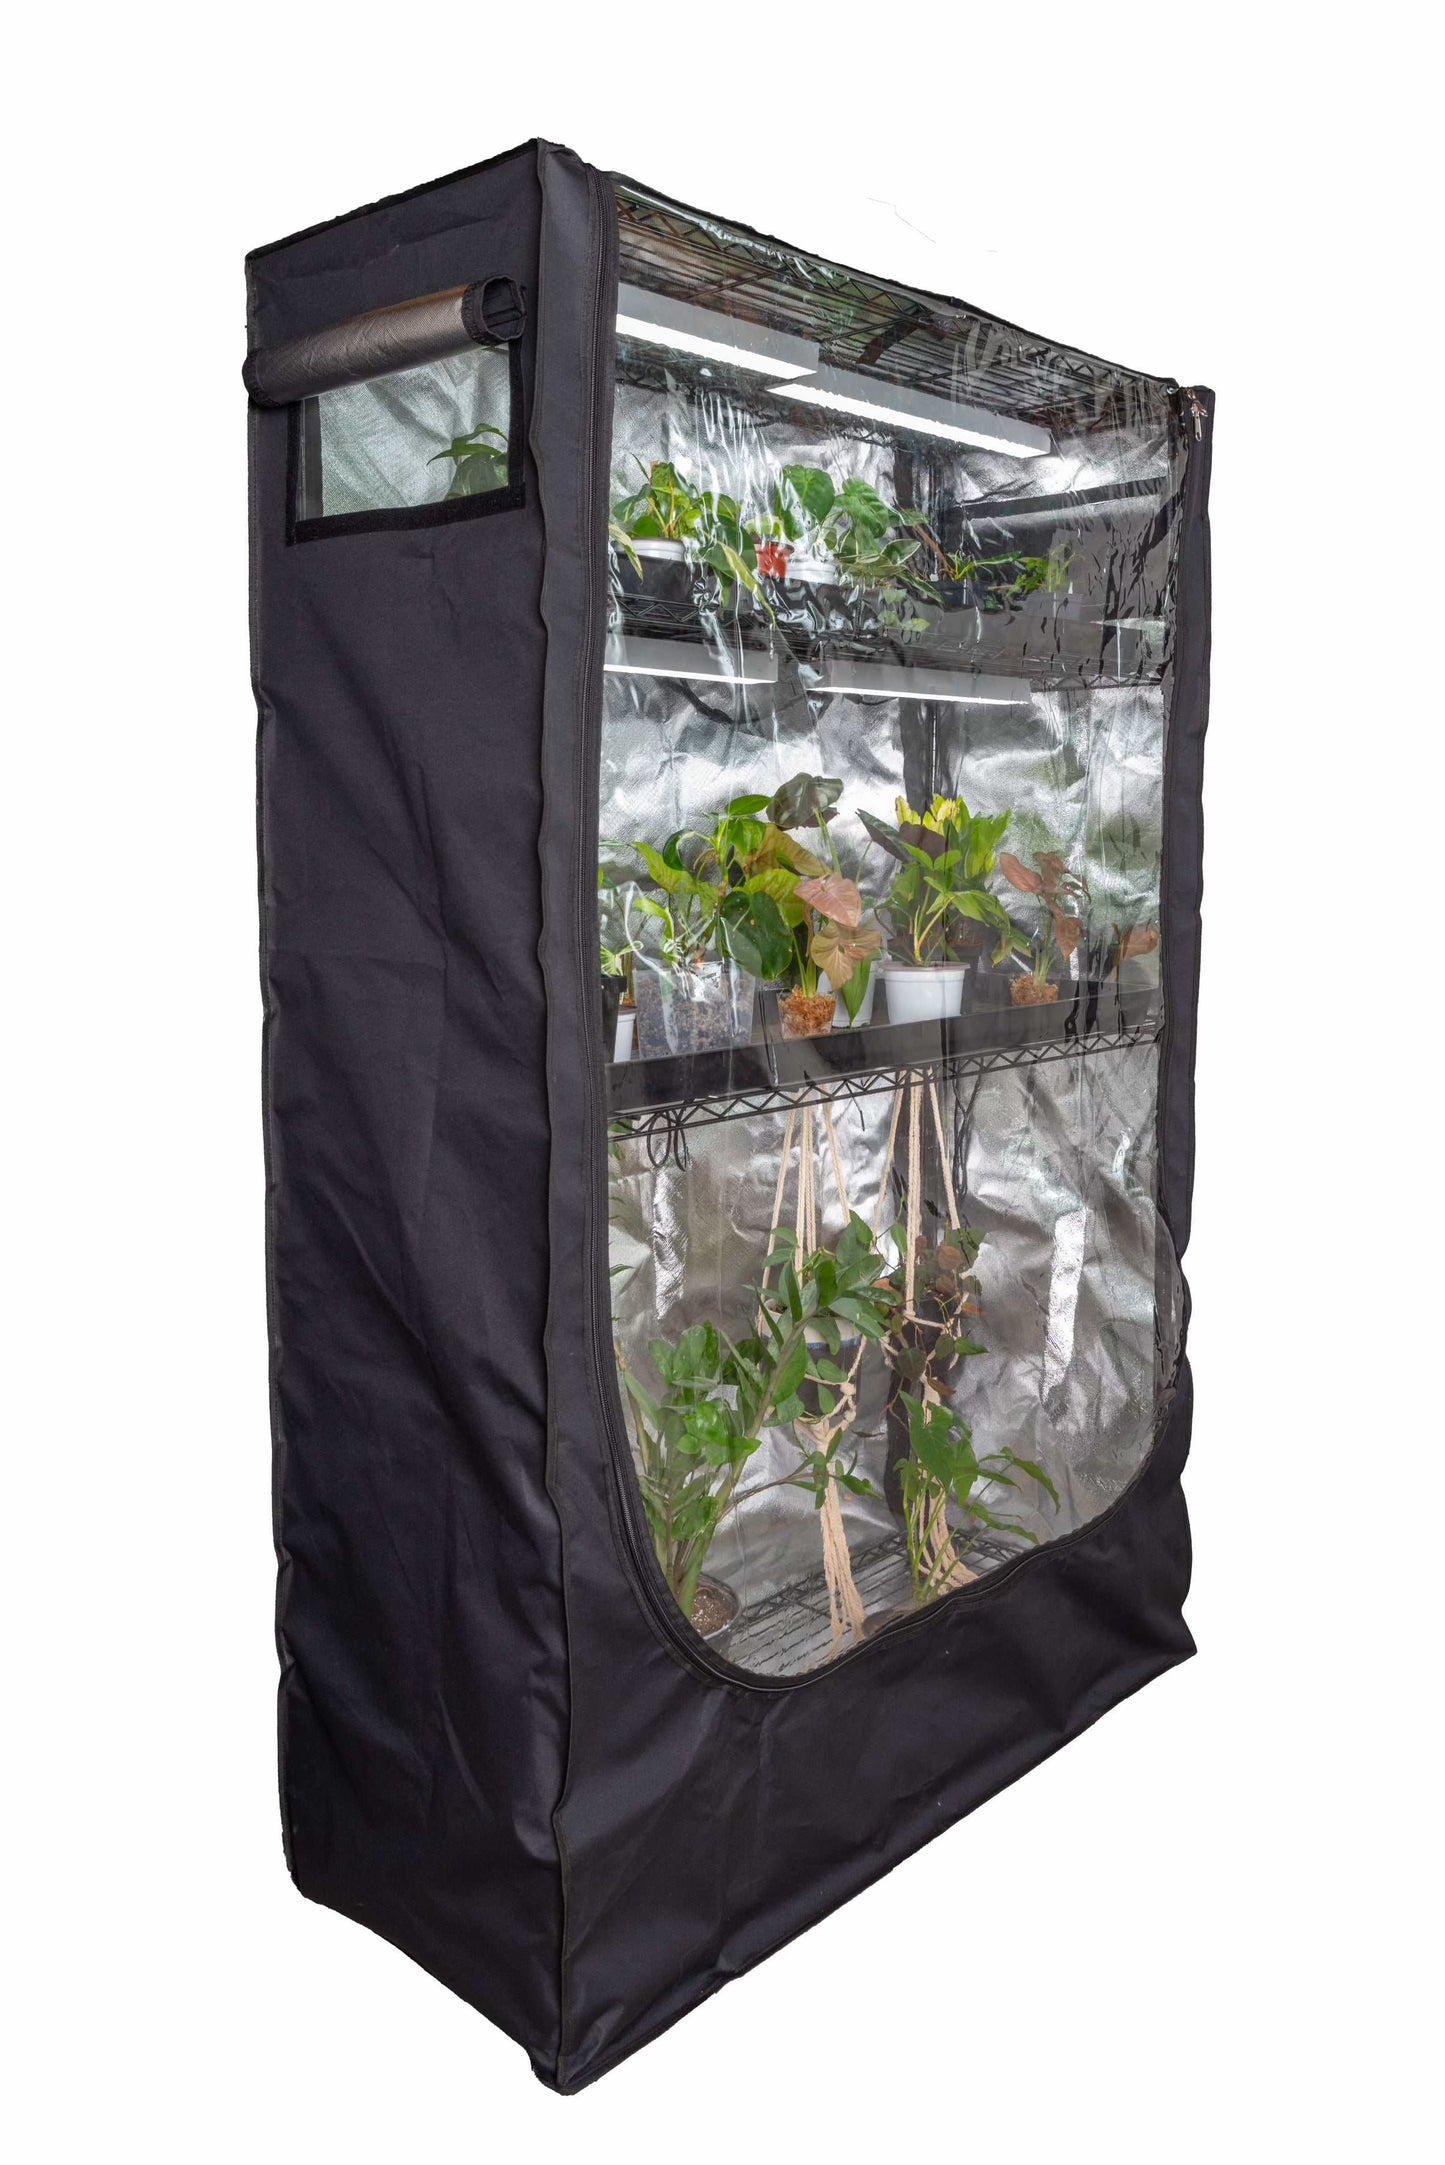 Bakers Rack (48-18-72) Greenhouse and Grow Tent Plant Cover